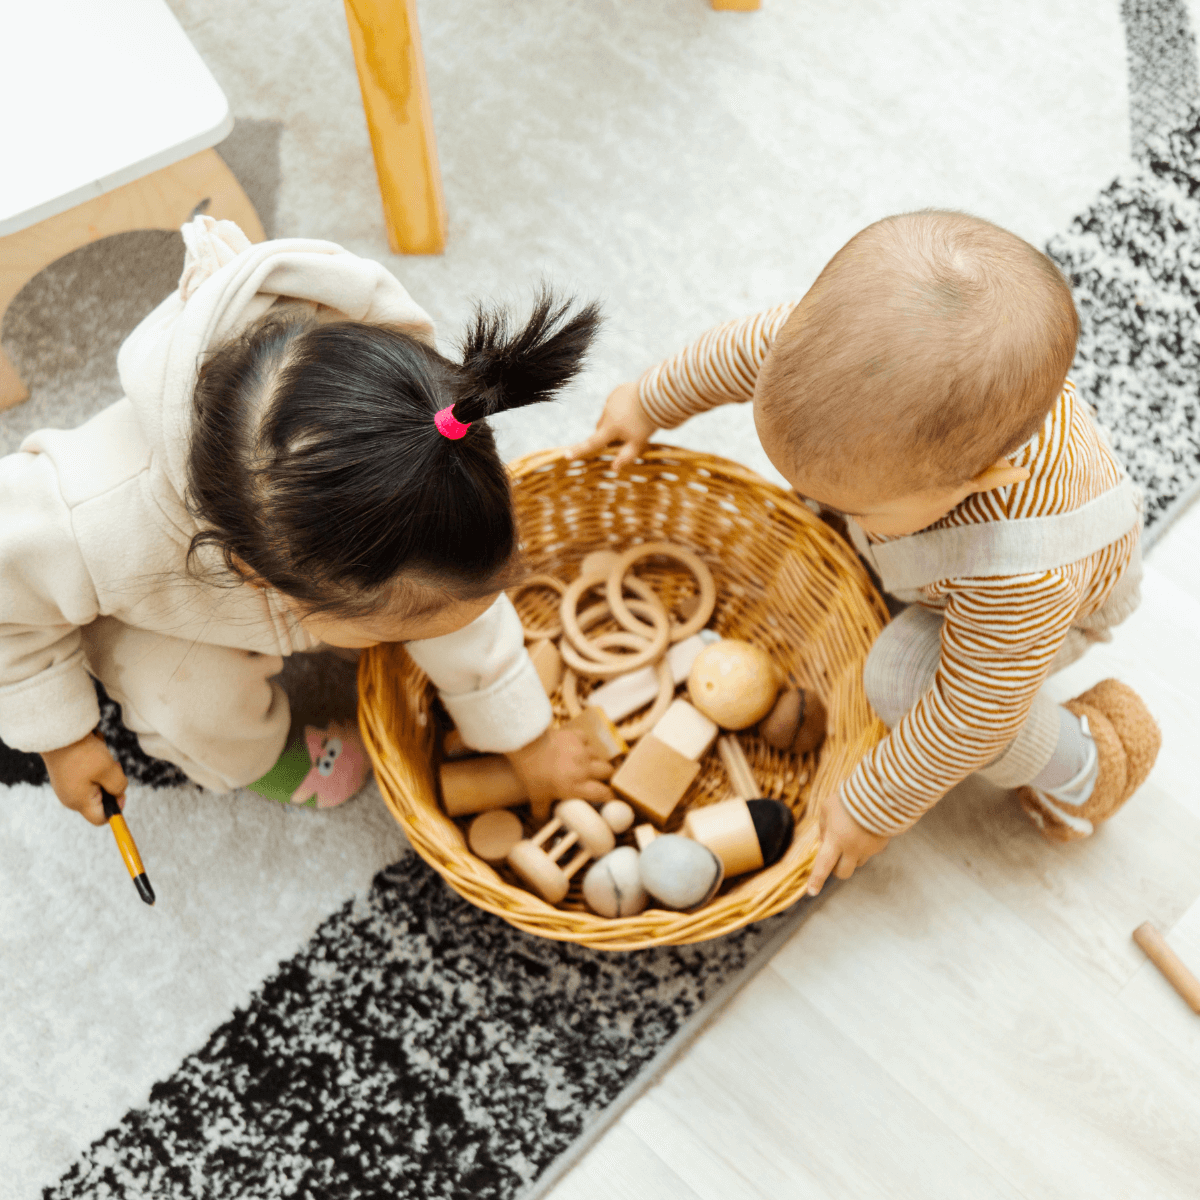 The Best Montessori Toys for 1-Year-Olds